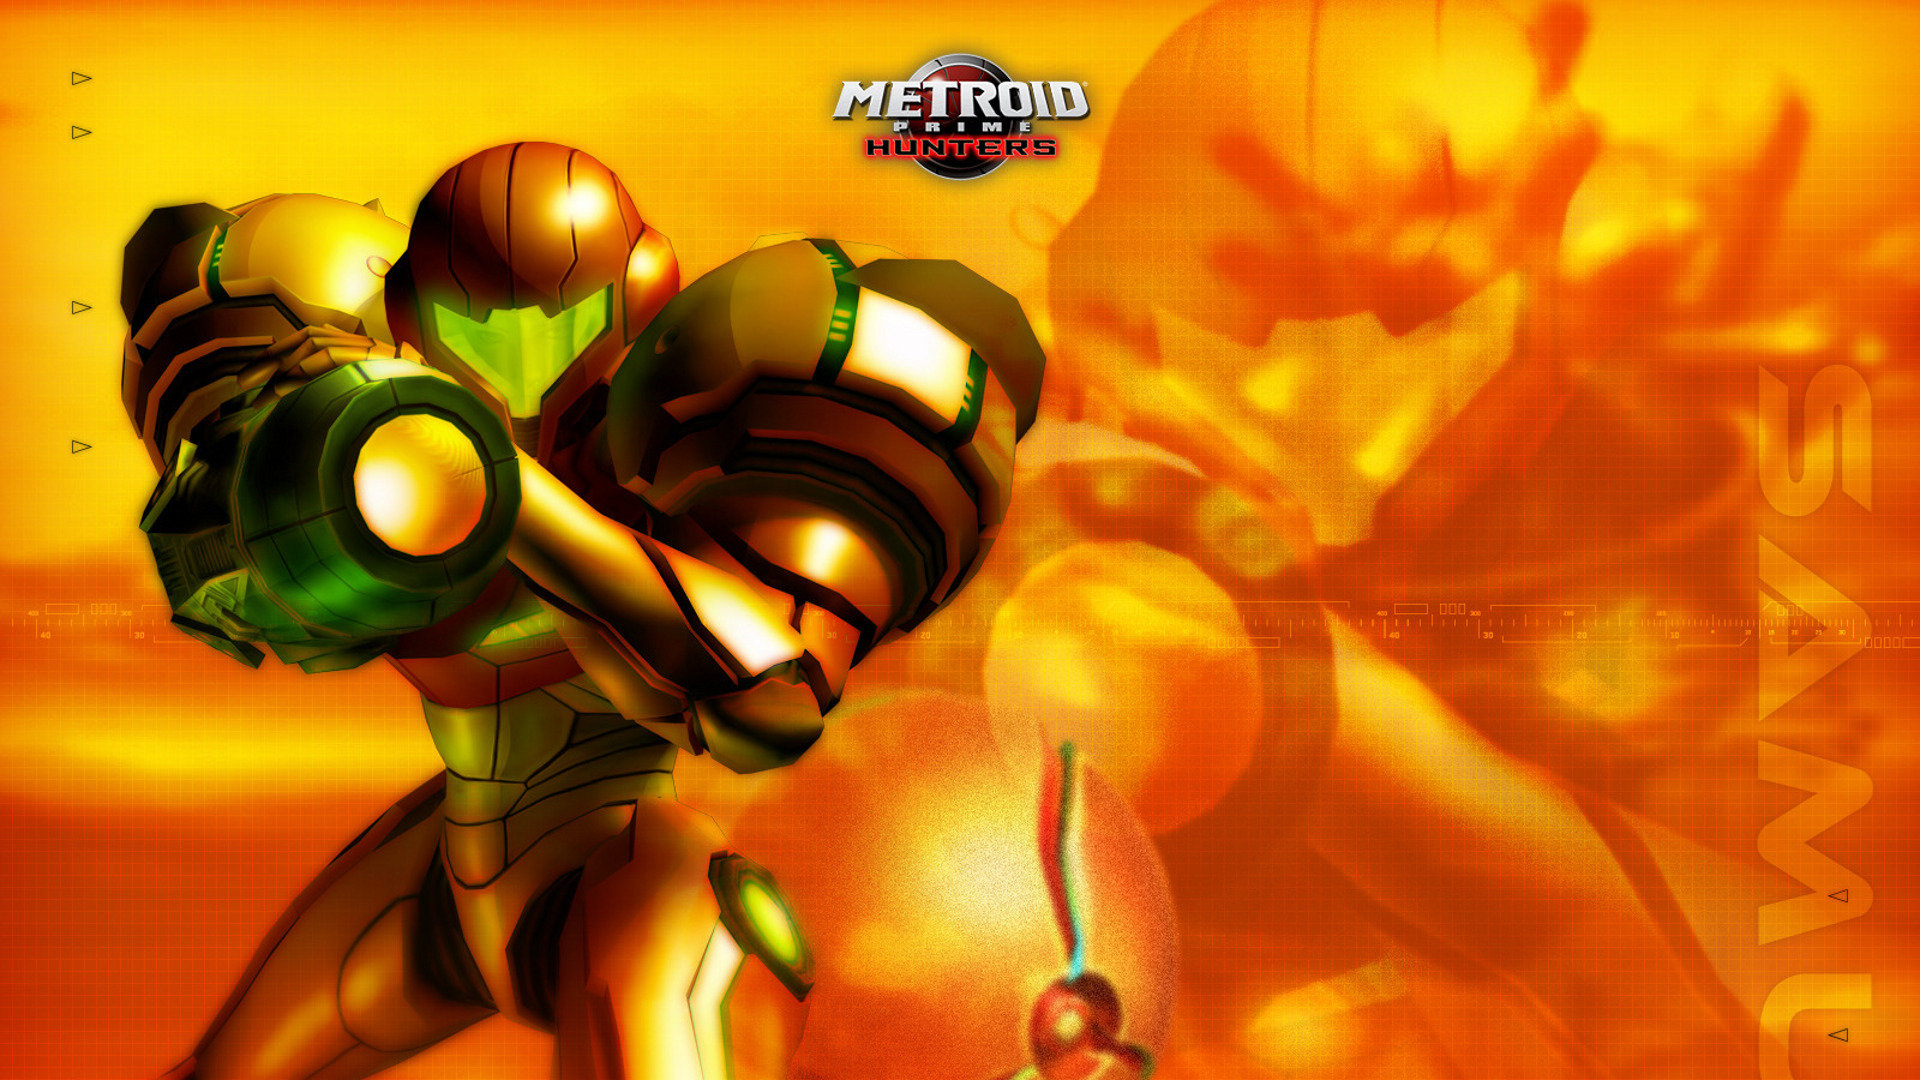 Download full hd 1080p Metroid Prime Hunters desktop background ID:185336 for free